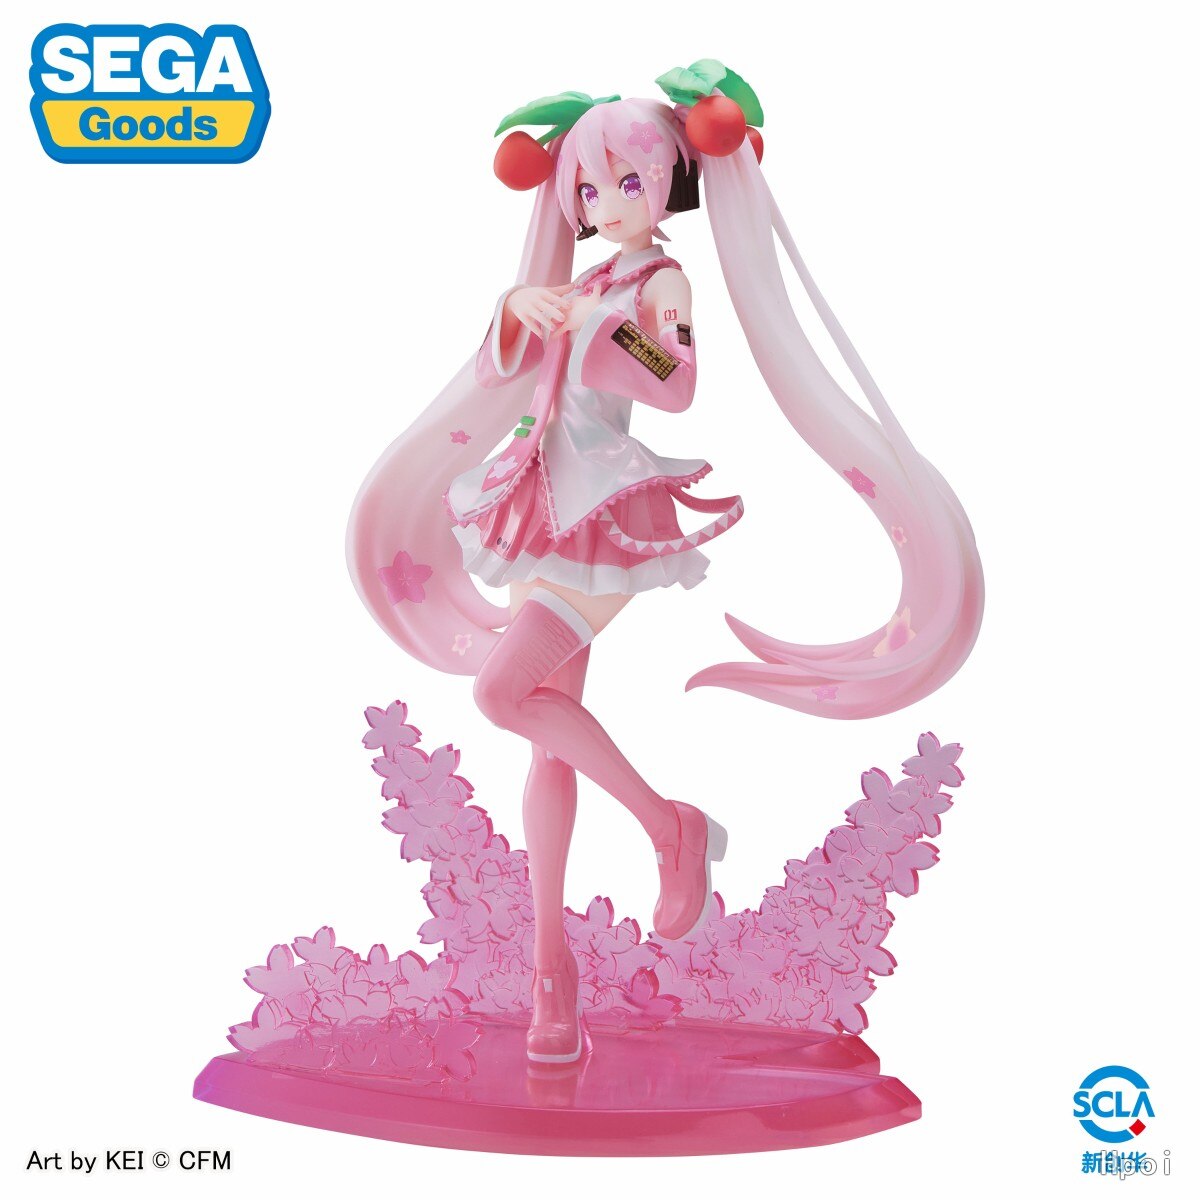 Admire the Sakura figurine, with hair flowing like petals & cherry blossoms shows spring's joy. If you are looking for more Vocaloid, We have it all! | Check out all our Anime Merch now!